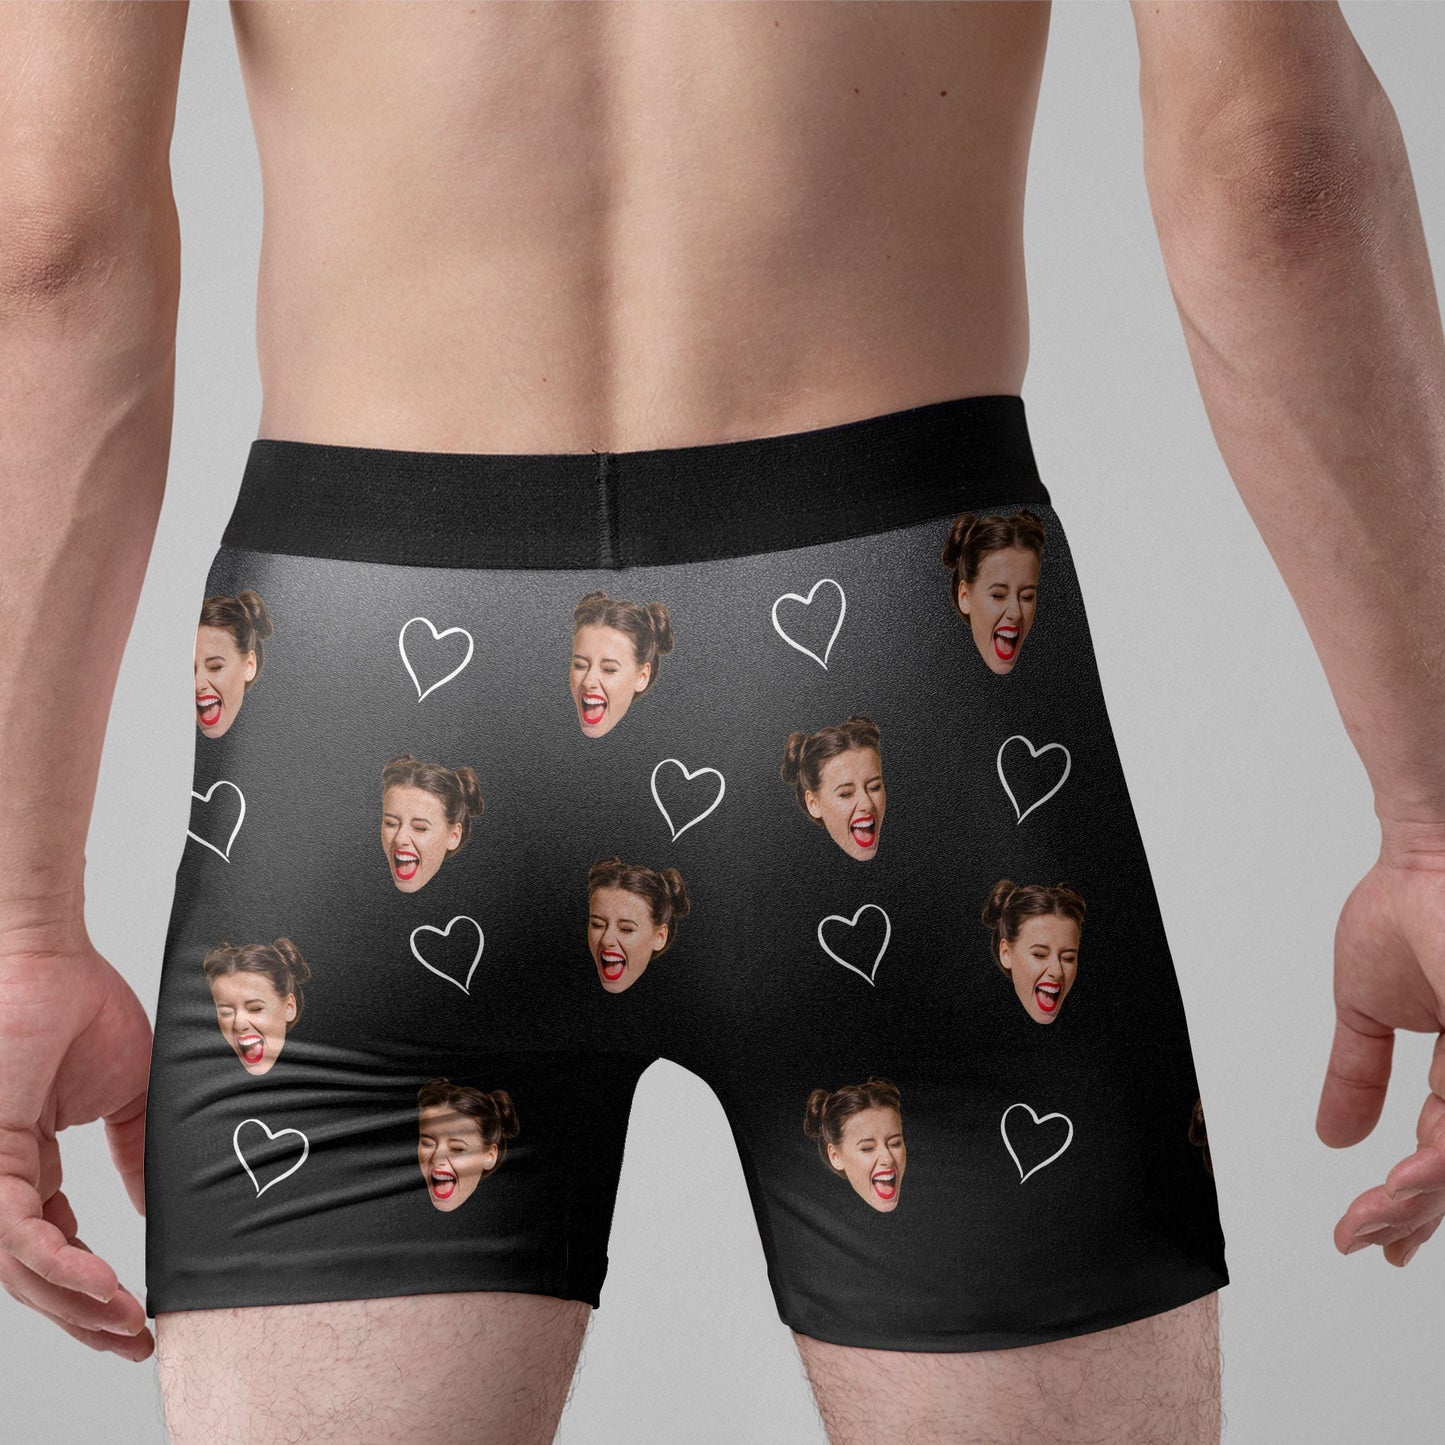 Love You To The Moon And Back Anniversary Gift - Personalized Photo Men's Boxer Briefs